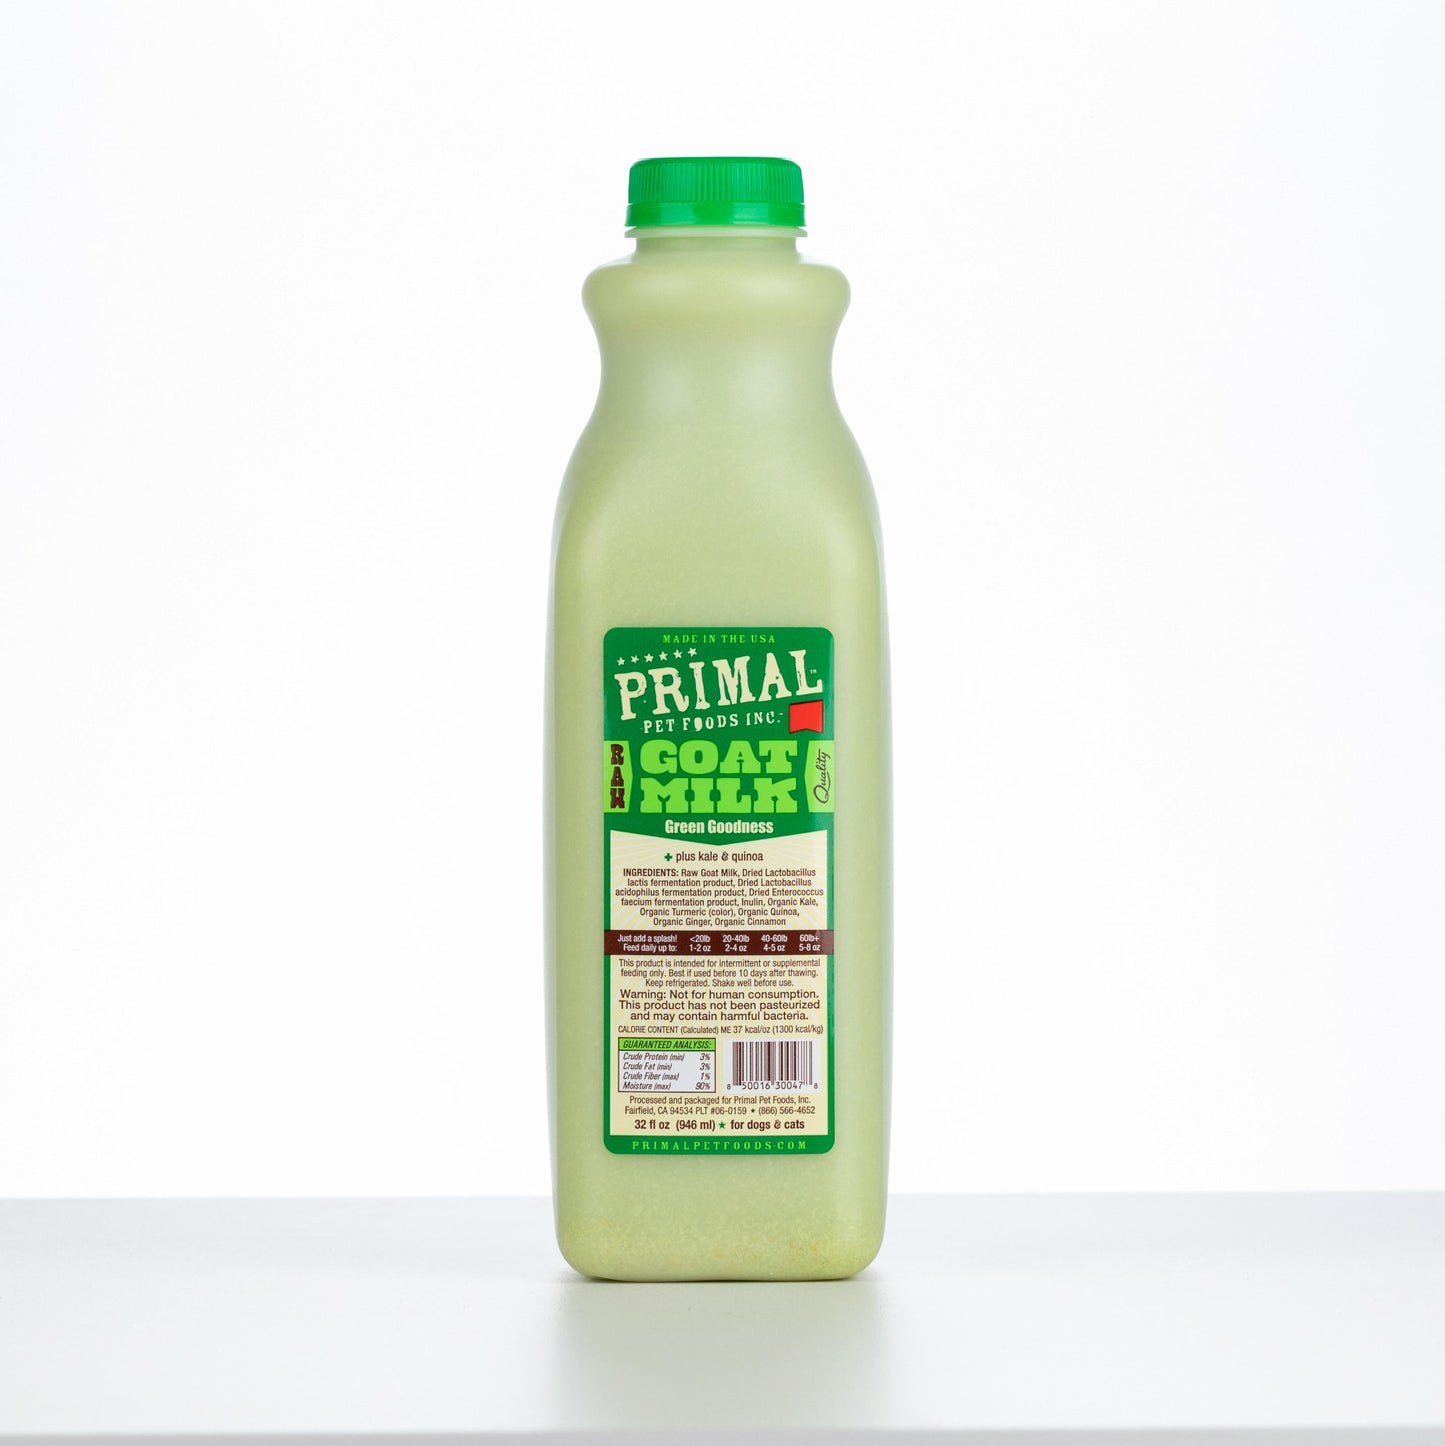 Primal Raw Frozen Goat Milk 'Green Goodness' for Dogs & Cats, 32-oz (Size: 32-oz)